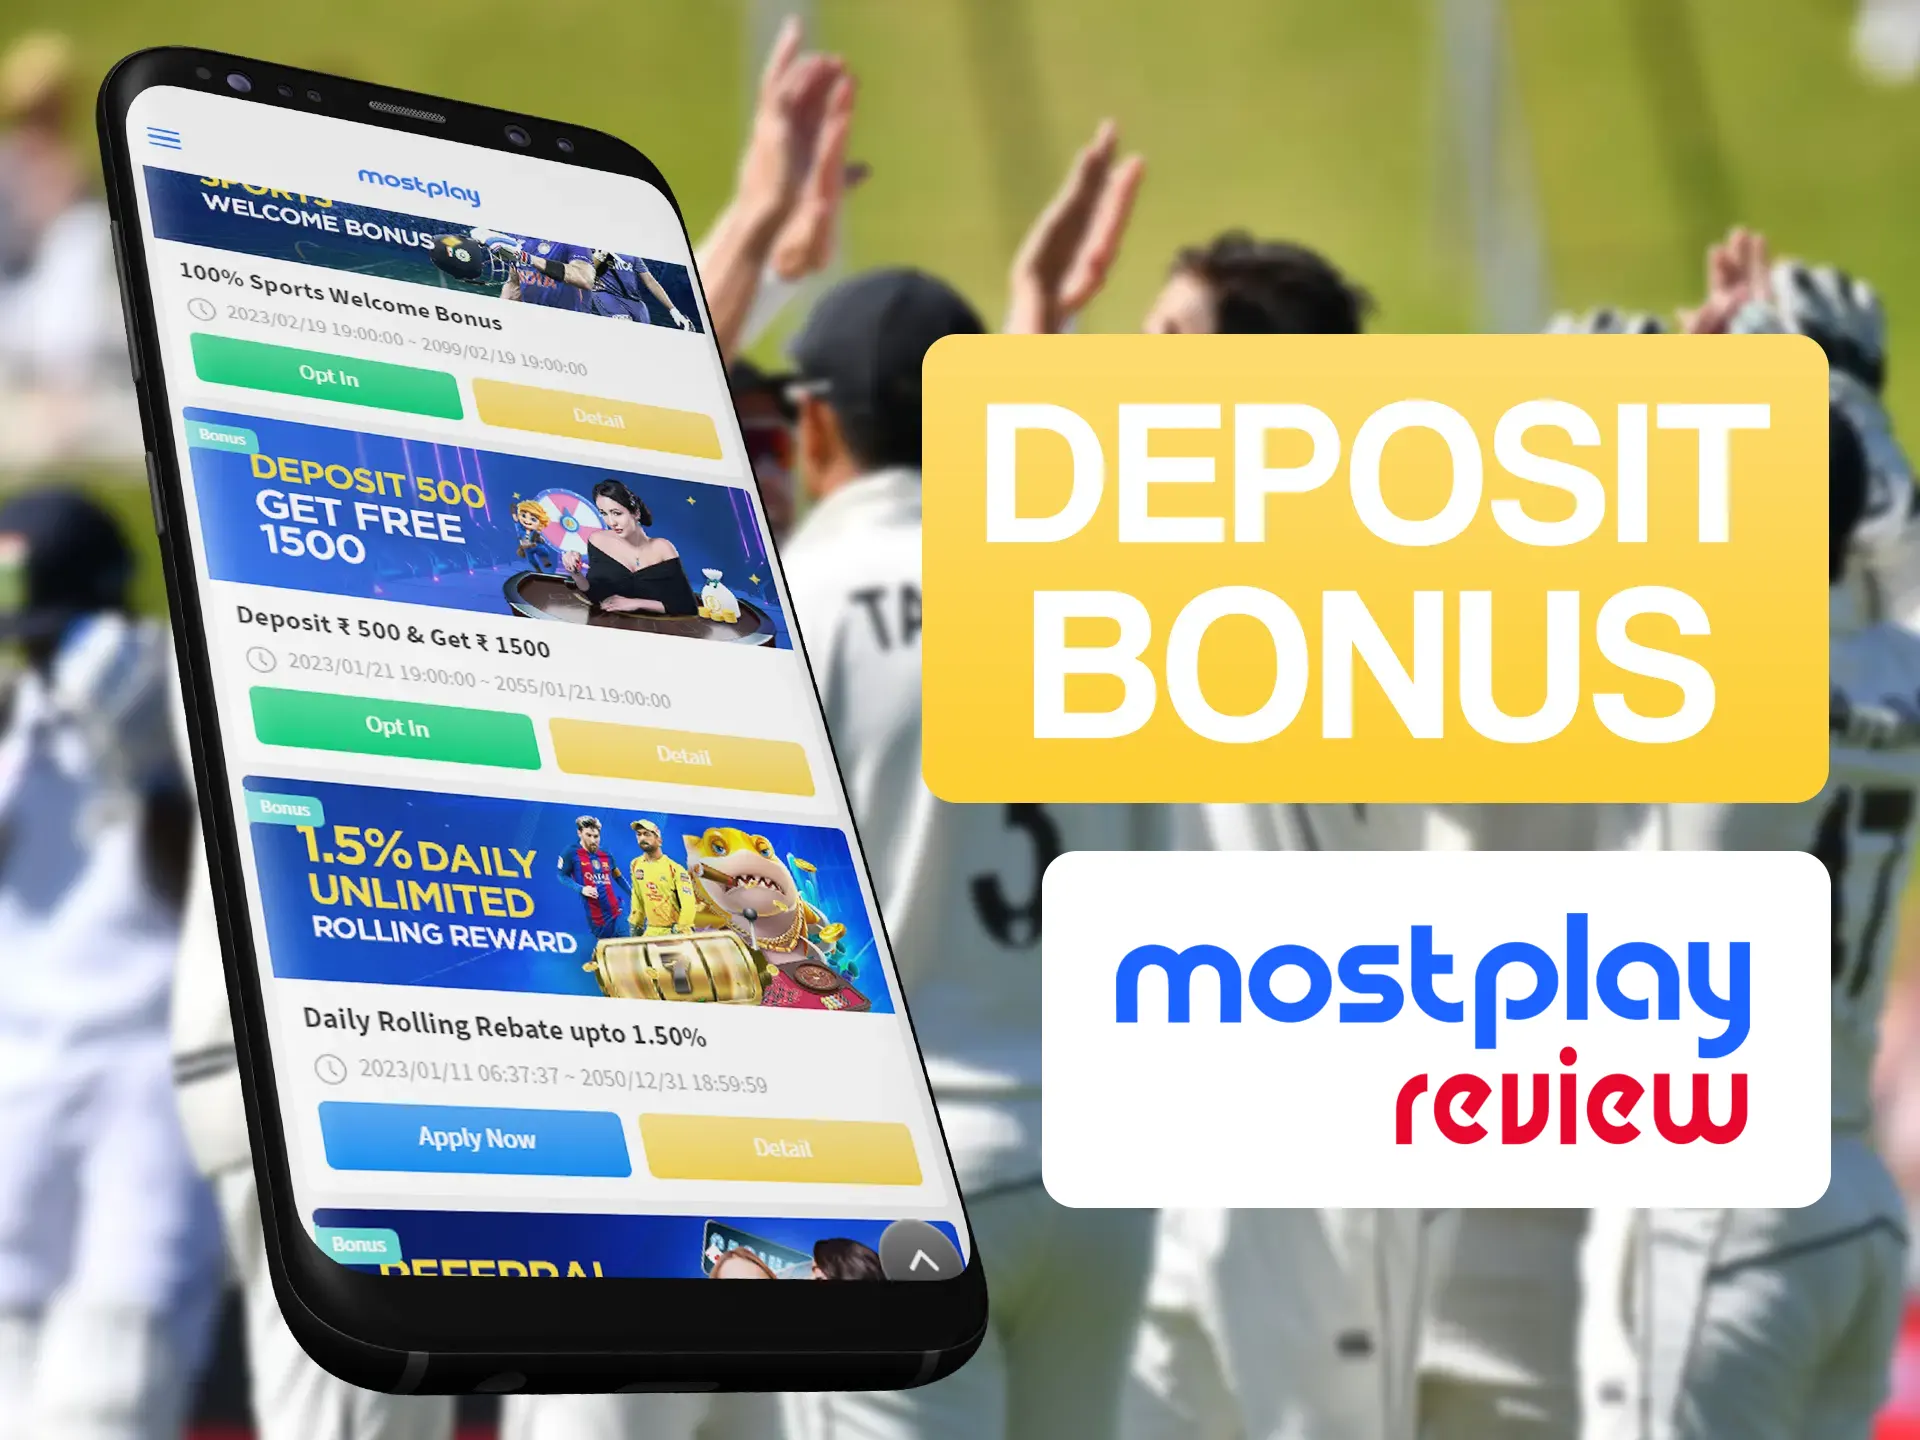 Make the first deposit at Mostplay and get an additional bonus.